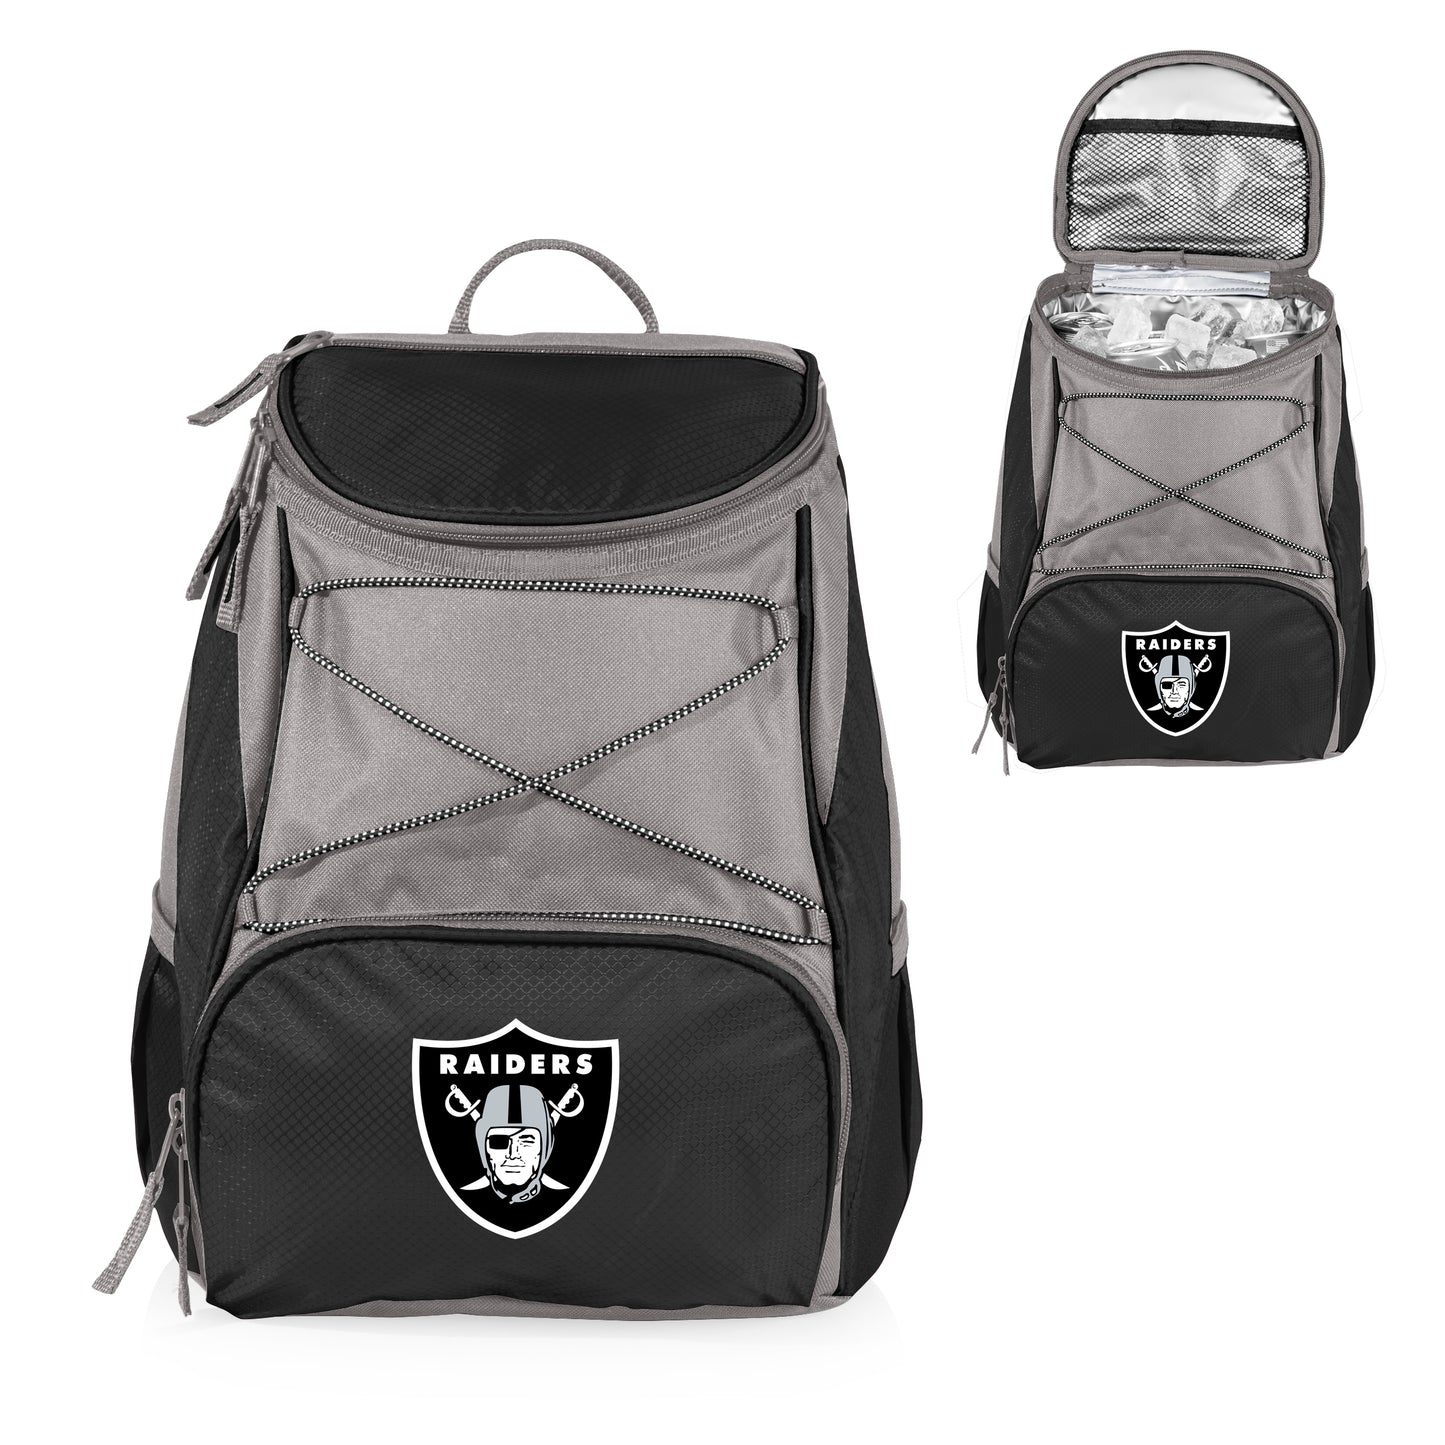 Las Vegas Raiders PTX Backpack Cooler, (Black with Gray Accents)